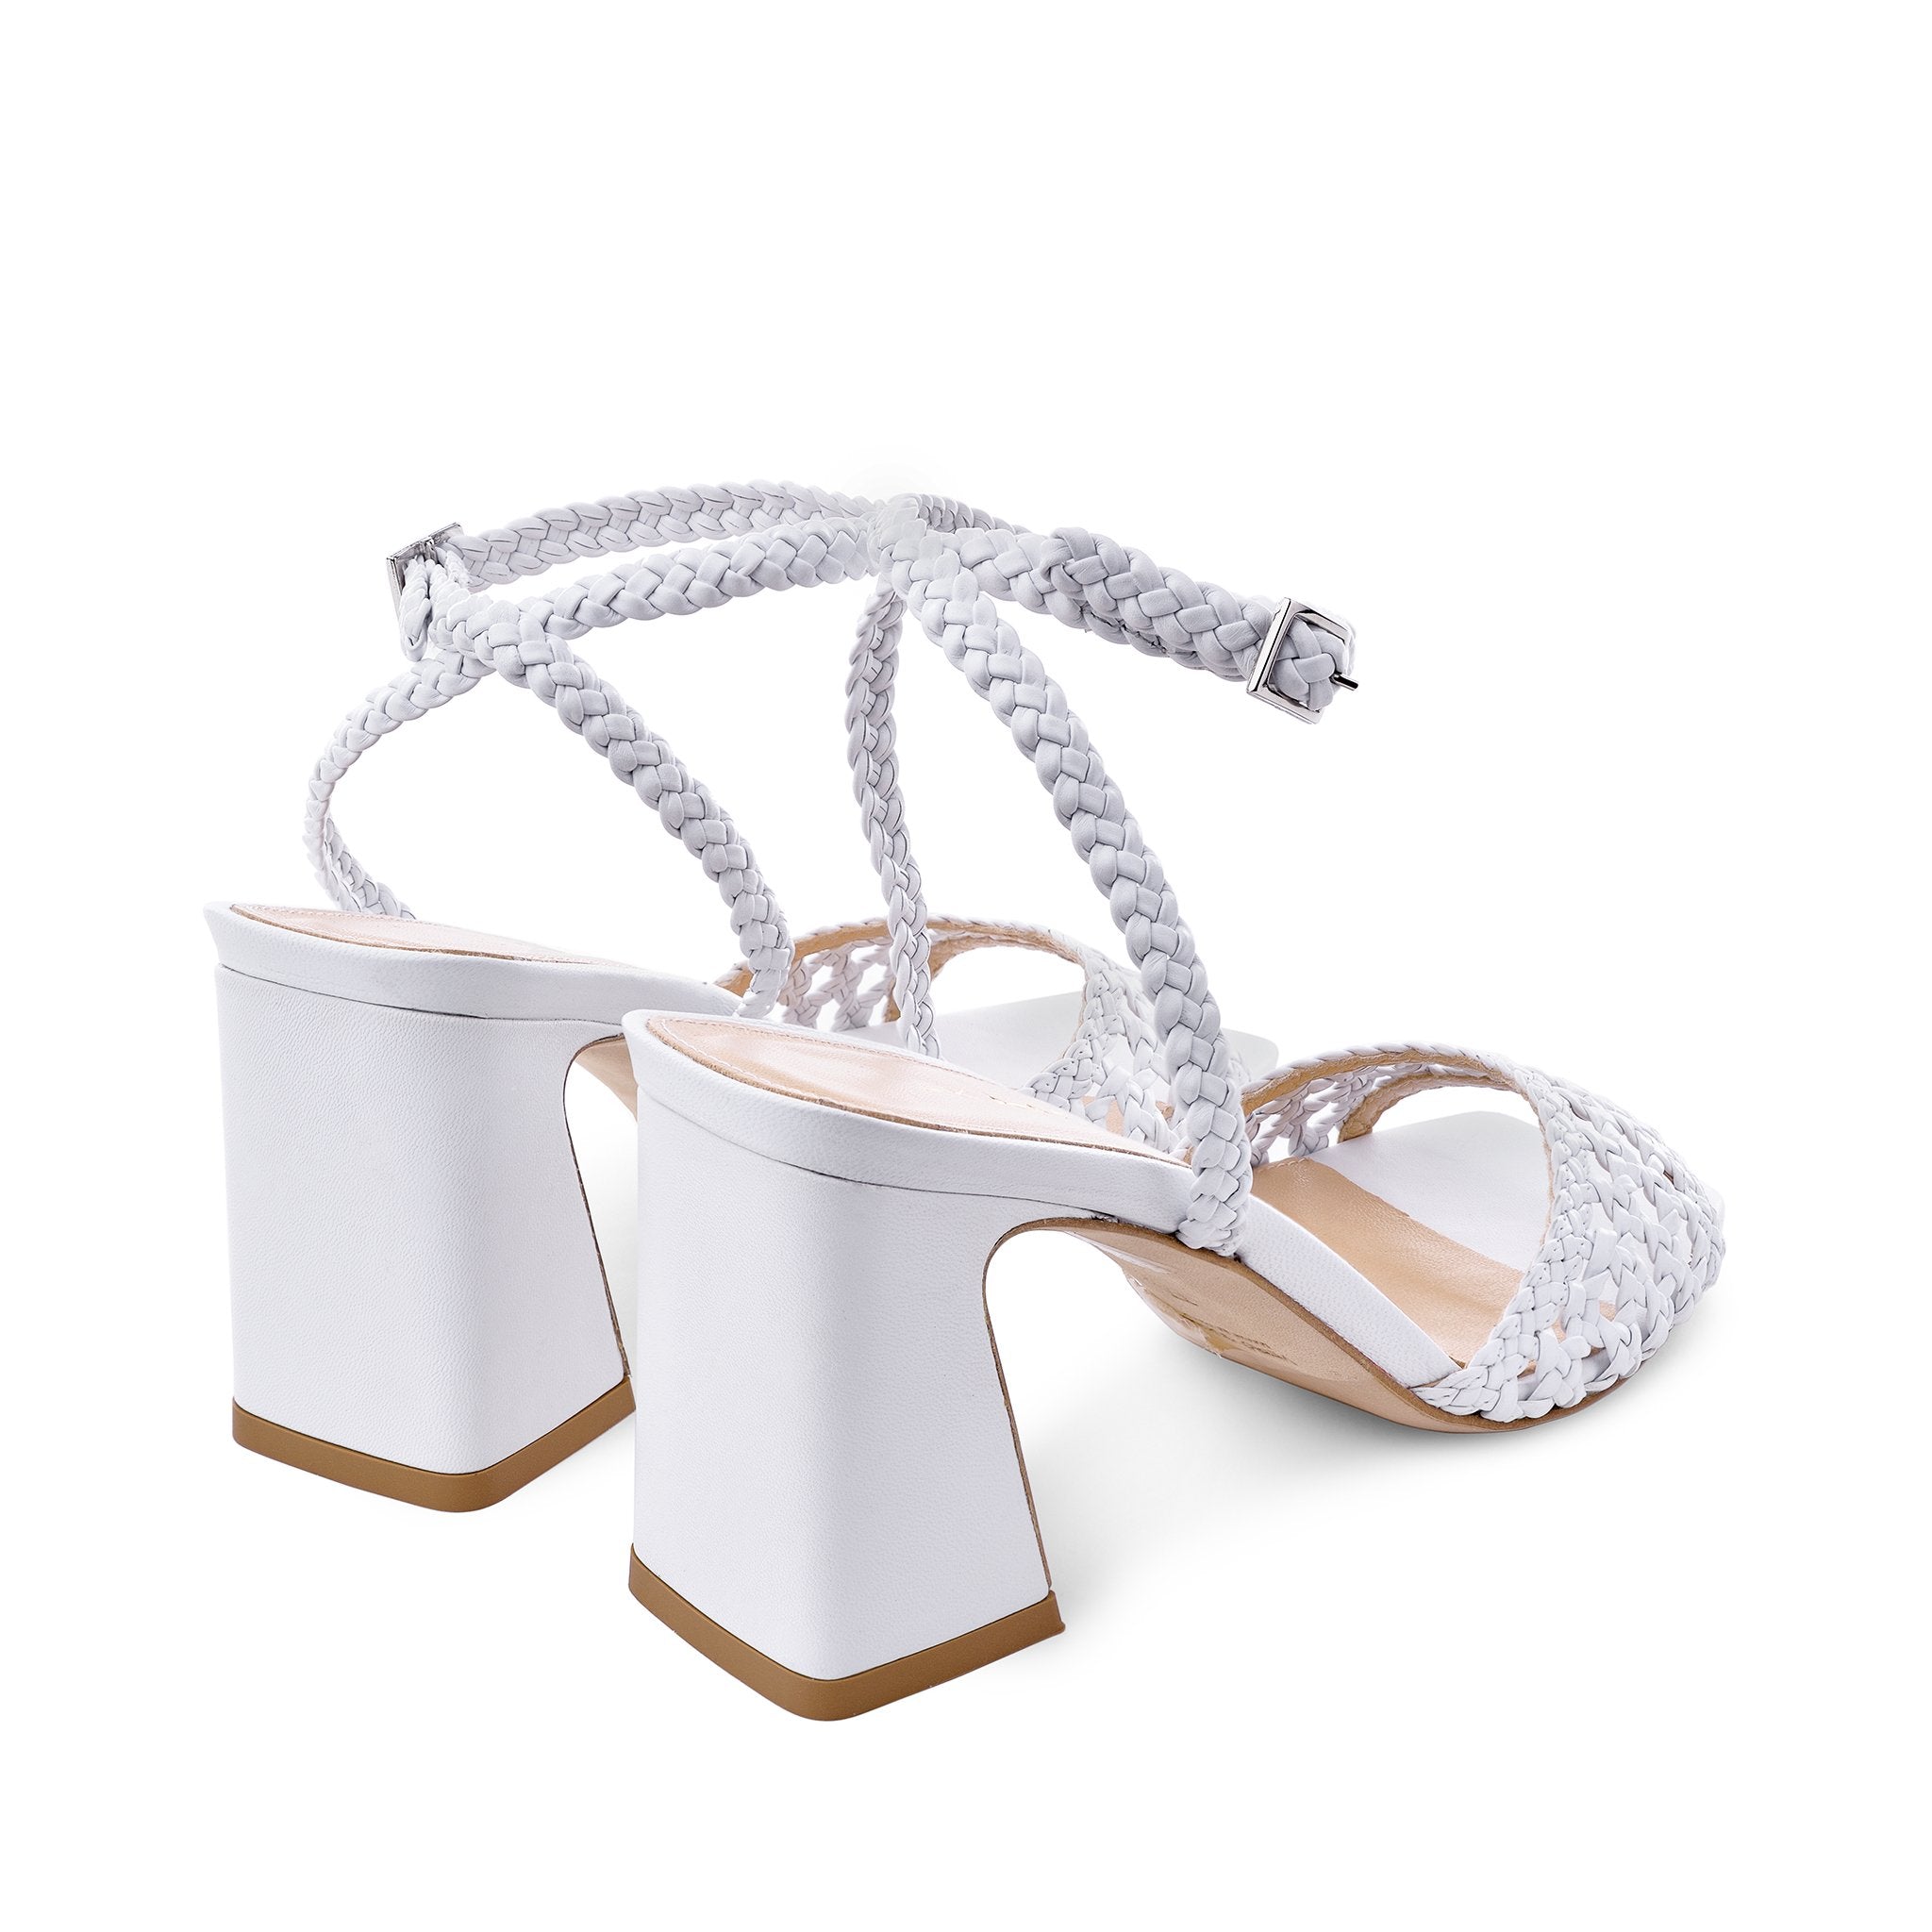 Tama White Woven Leather Sandals 1418-01 - 8